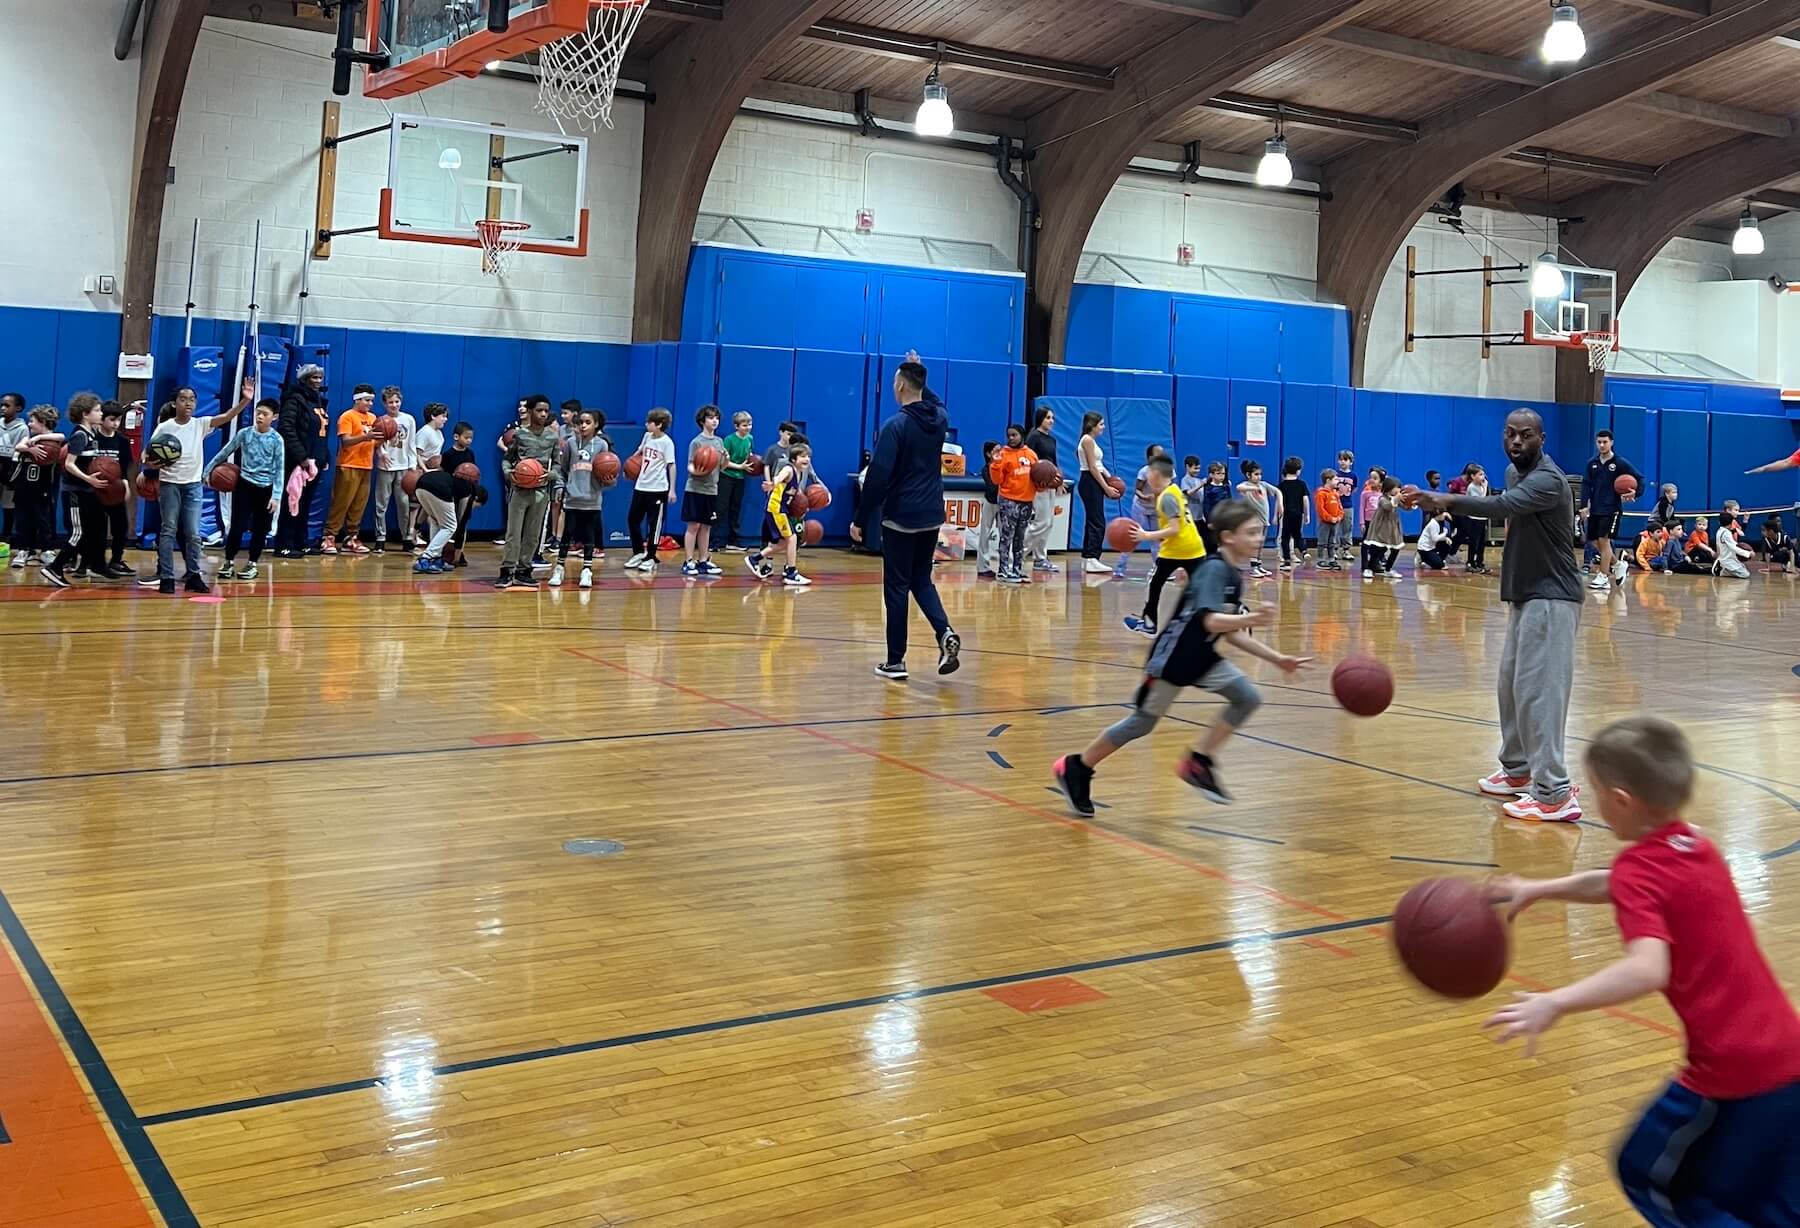 Ethical Culture Fieldston School Fieldston students play basketball in gym during March Madness event